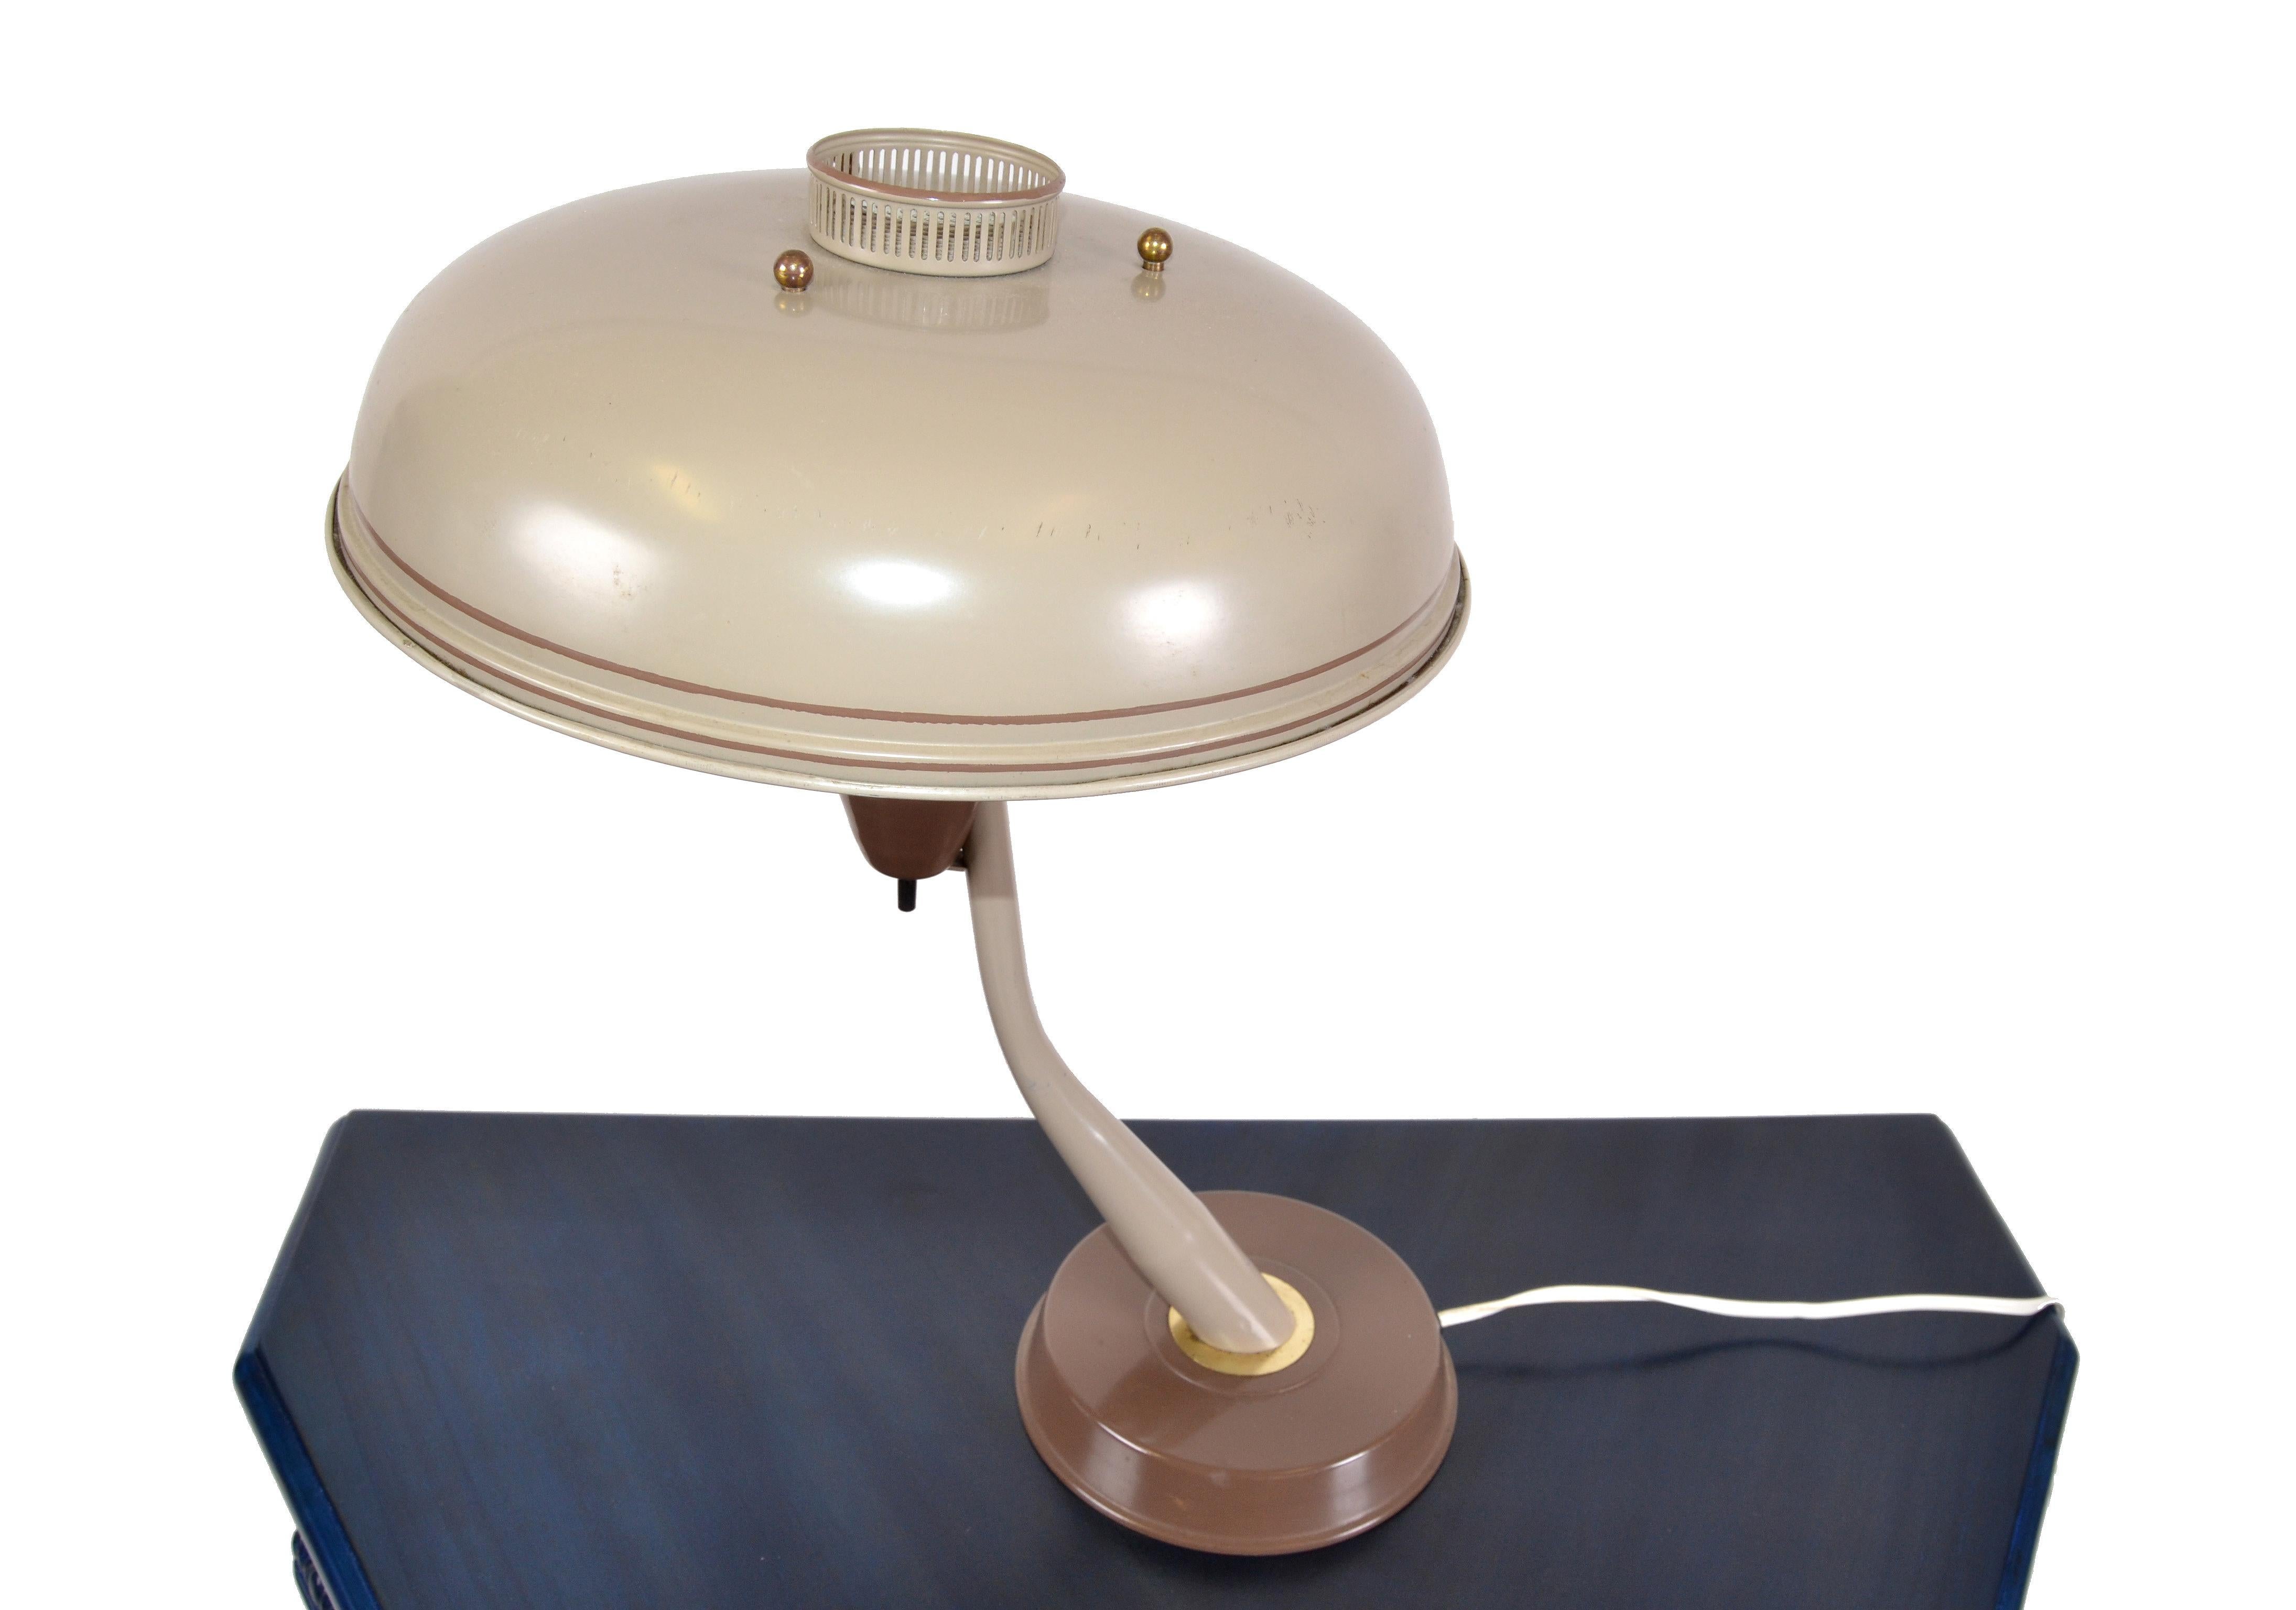  1950s Mid-Century Modern Space Age Brown Metal & Brass Flying Saucer Table Lamp In Good Condition For Sale In Miami, FL